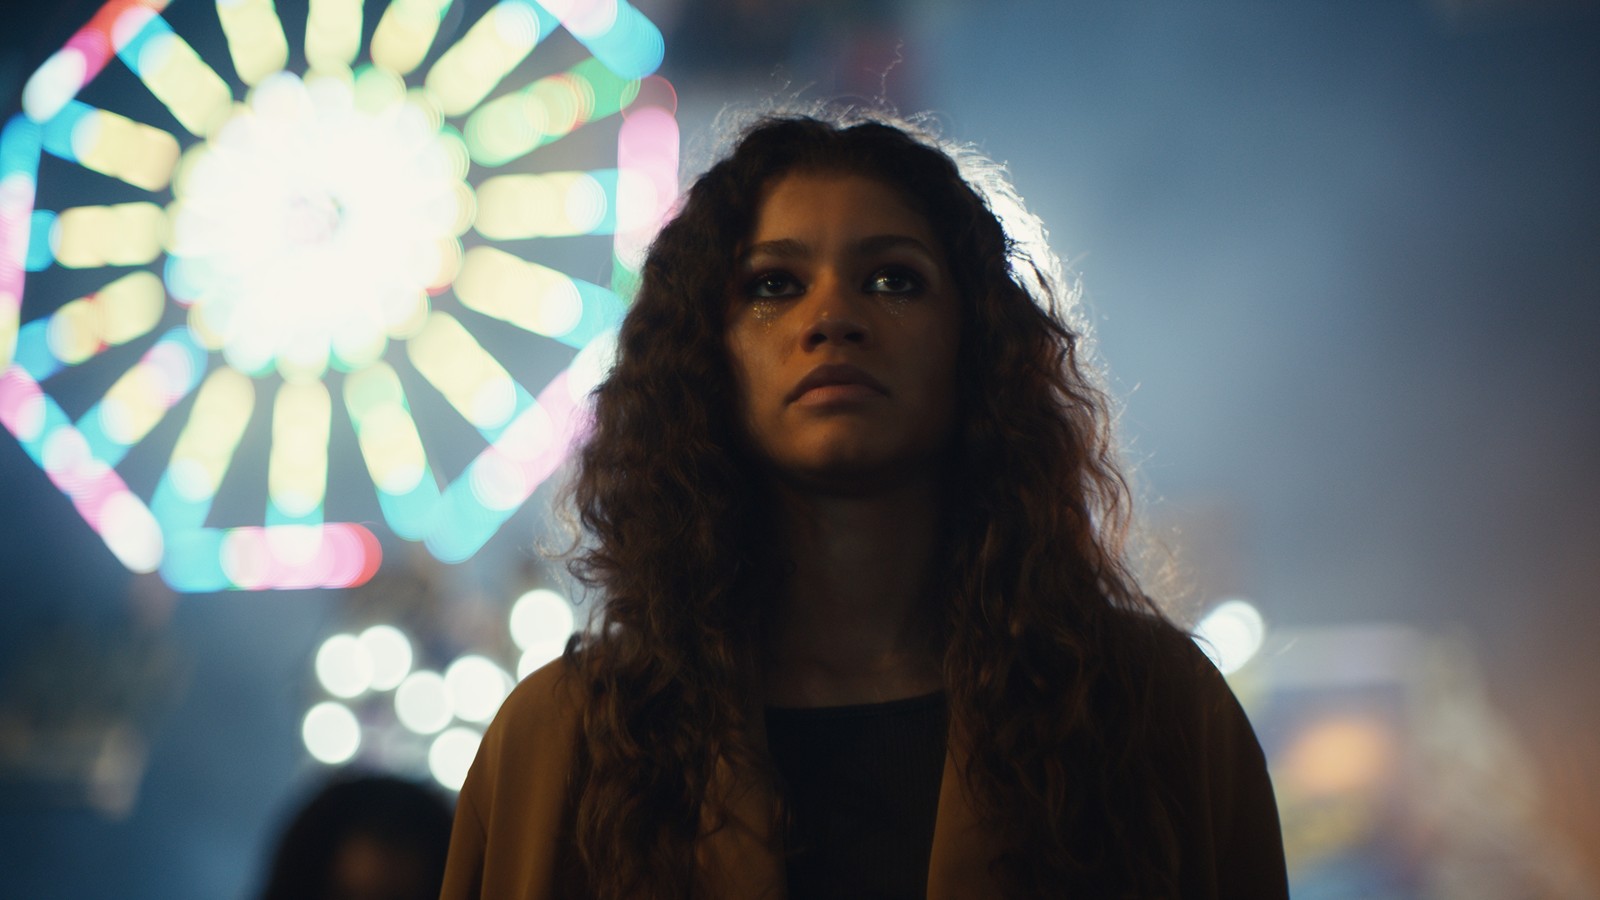 All Six Voies 2019 - Does HBO's 'Euphoria' Merit the Moral Panic?: Review - The Atlantic